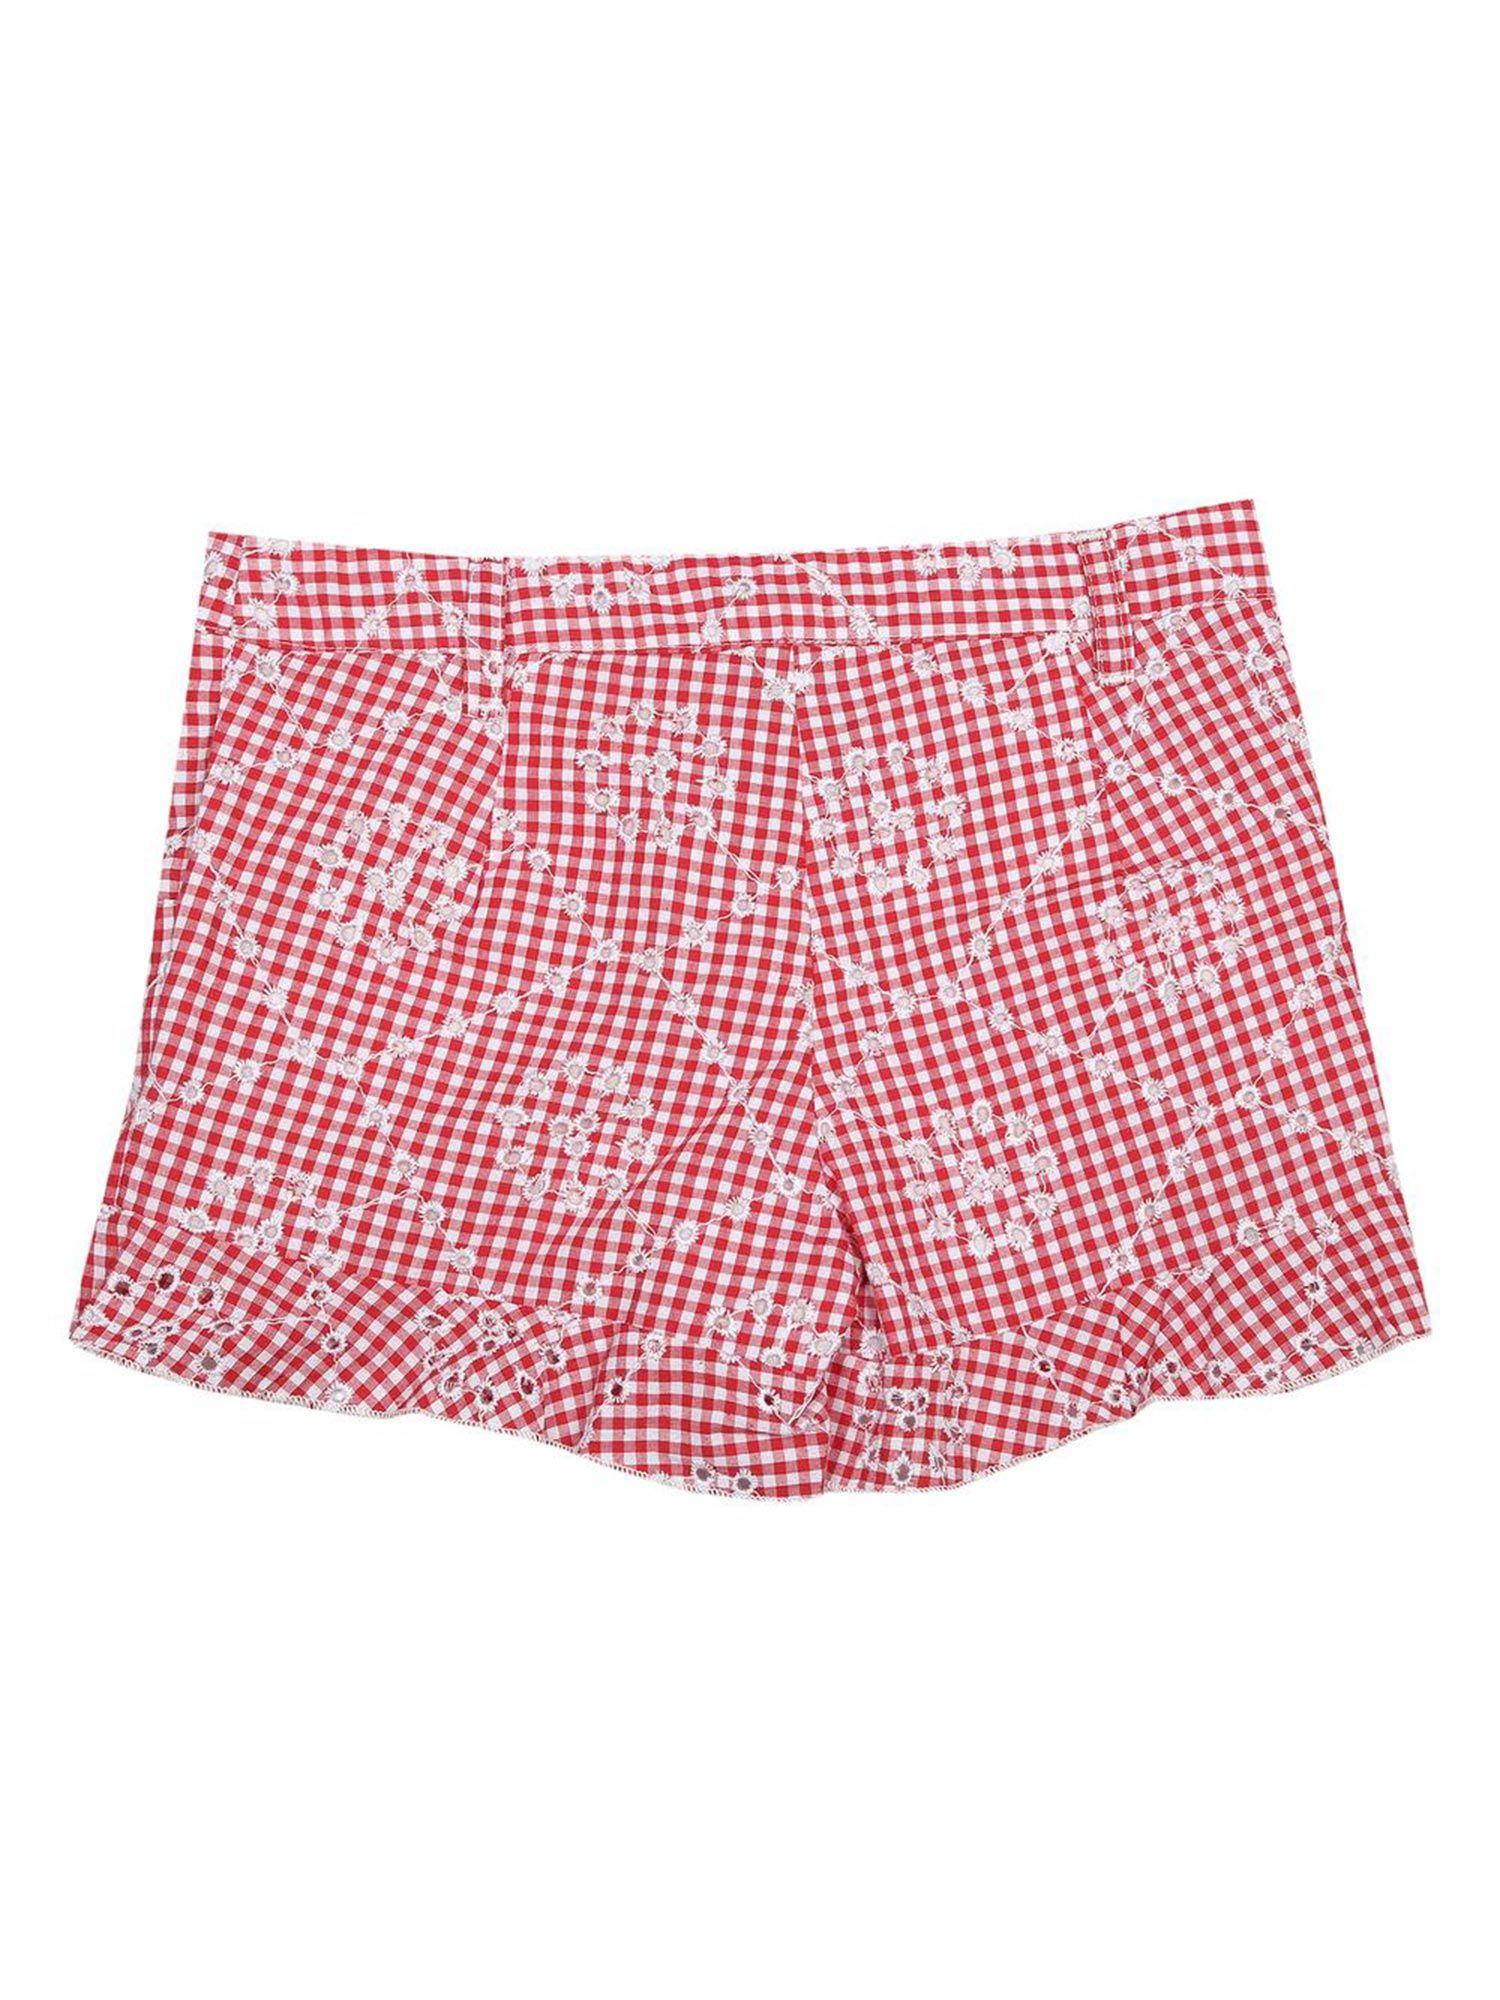 girls-red-checked-shorts